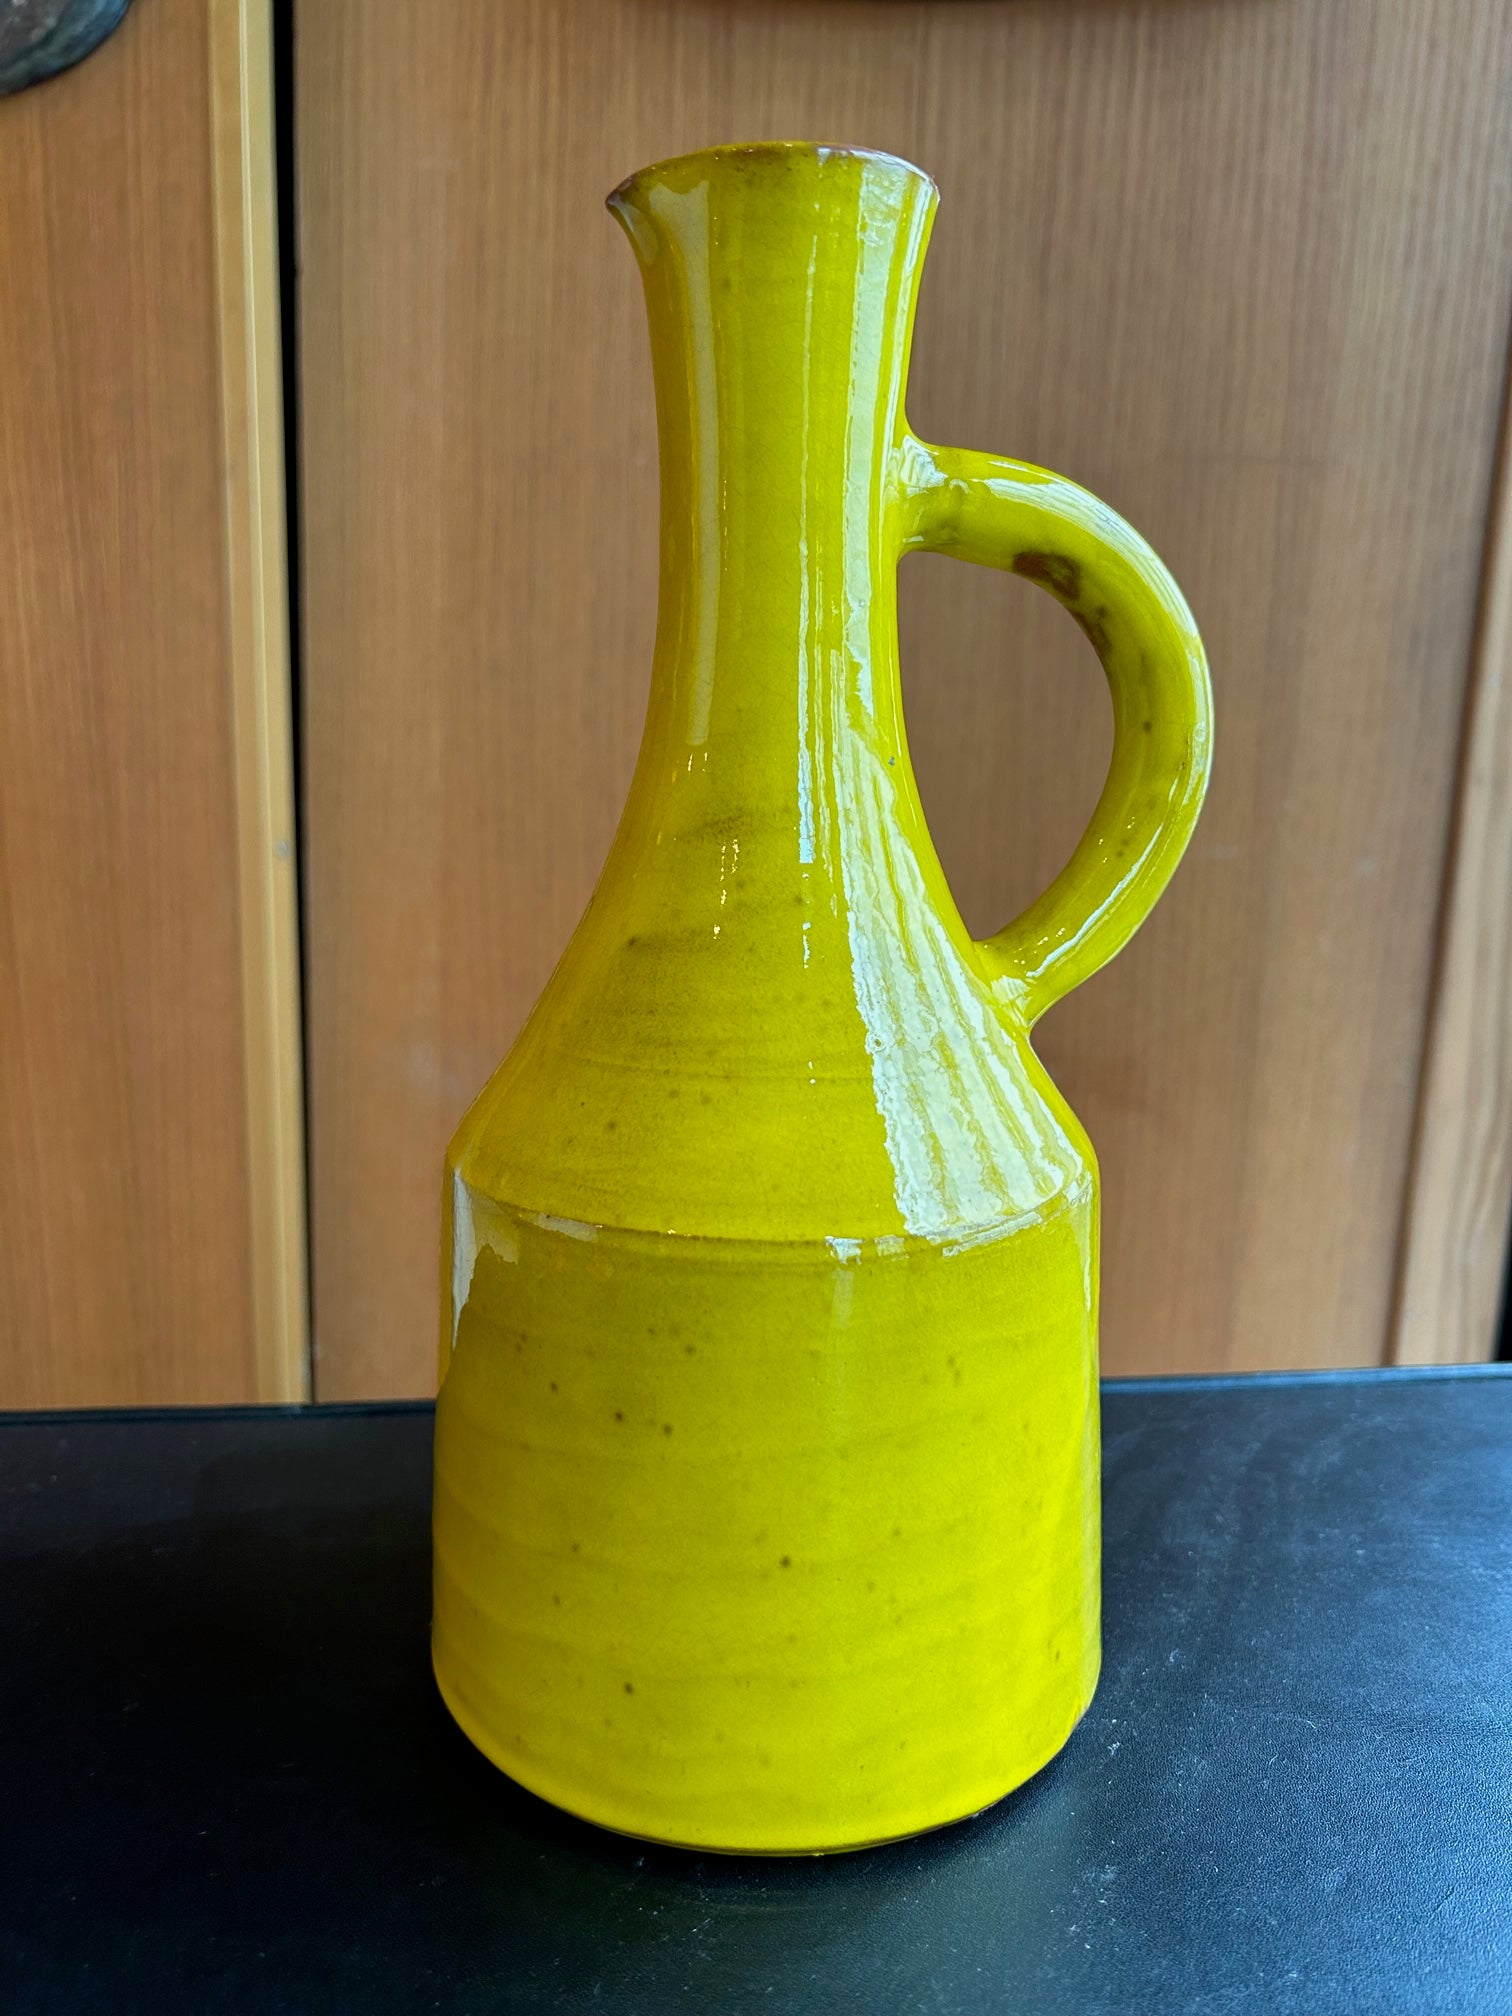 Ceramic Pitcher by Juliette Derel, France, 1970s
Documented in the book (eaxct item) 